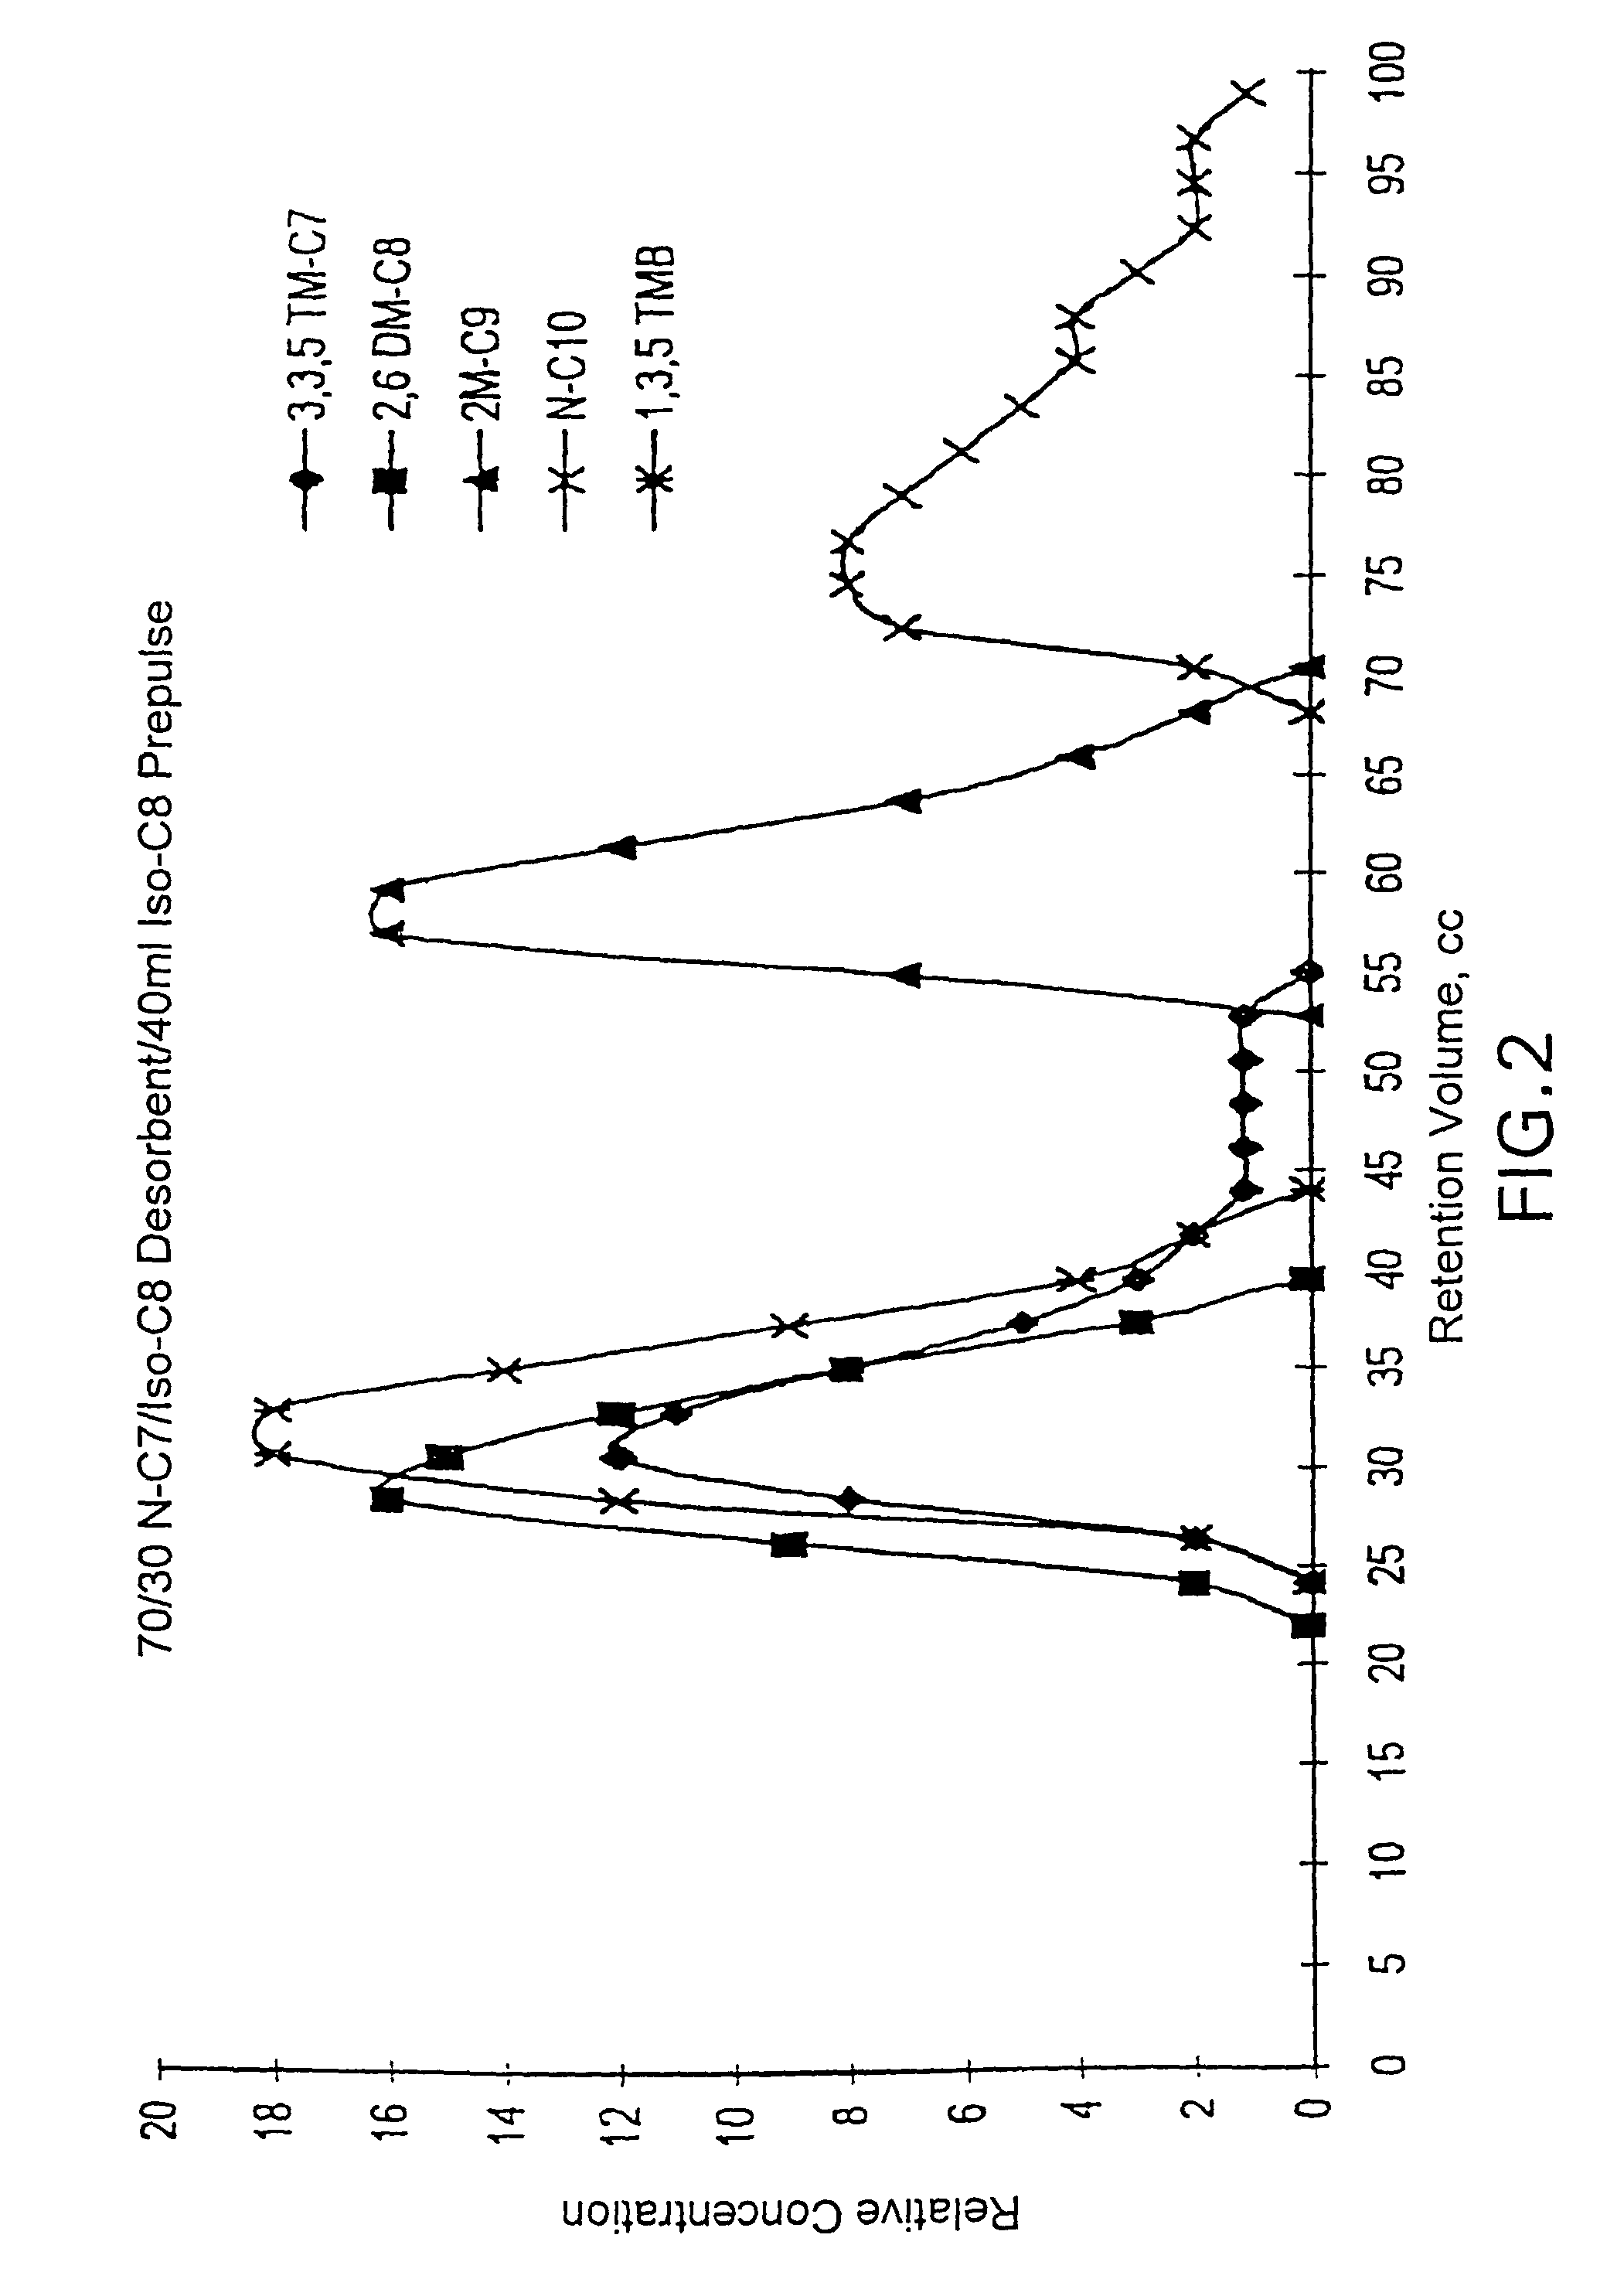 Phenyl-alkane compositions produced using an adsorptive separation section